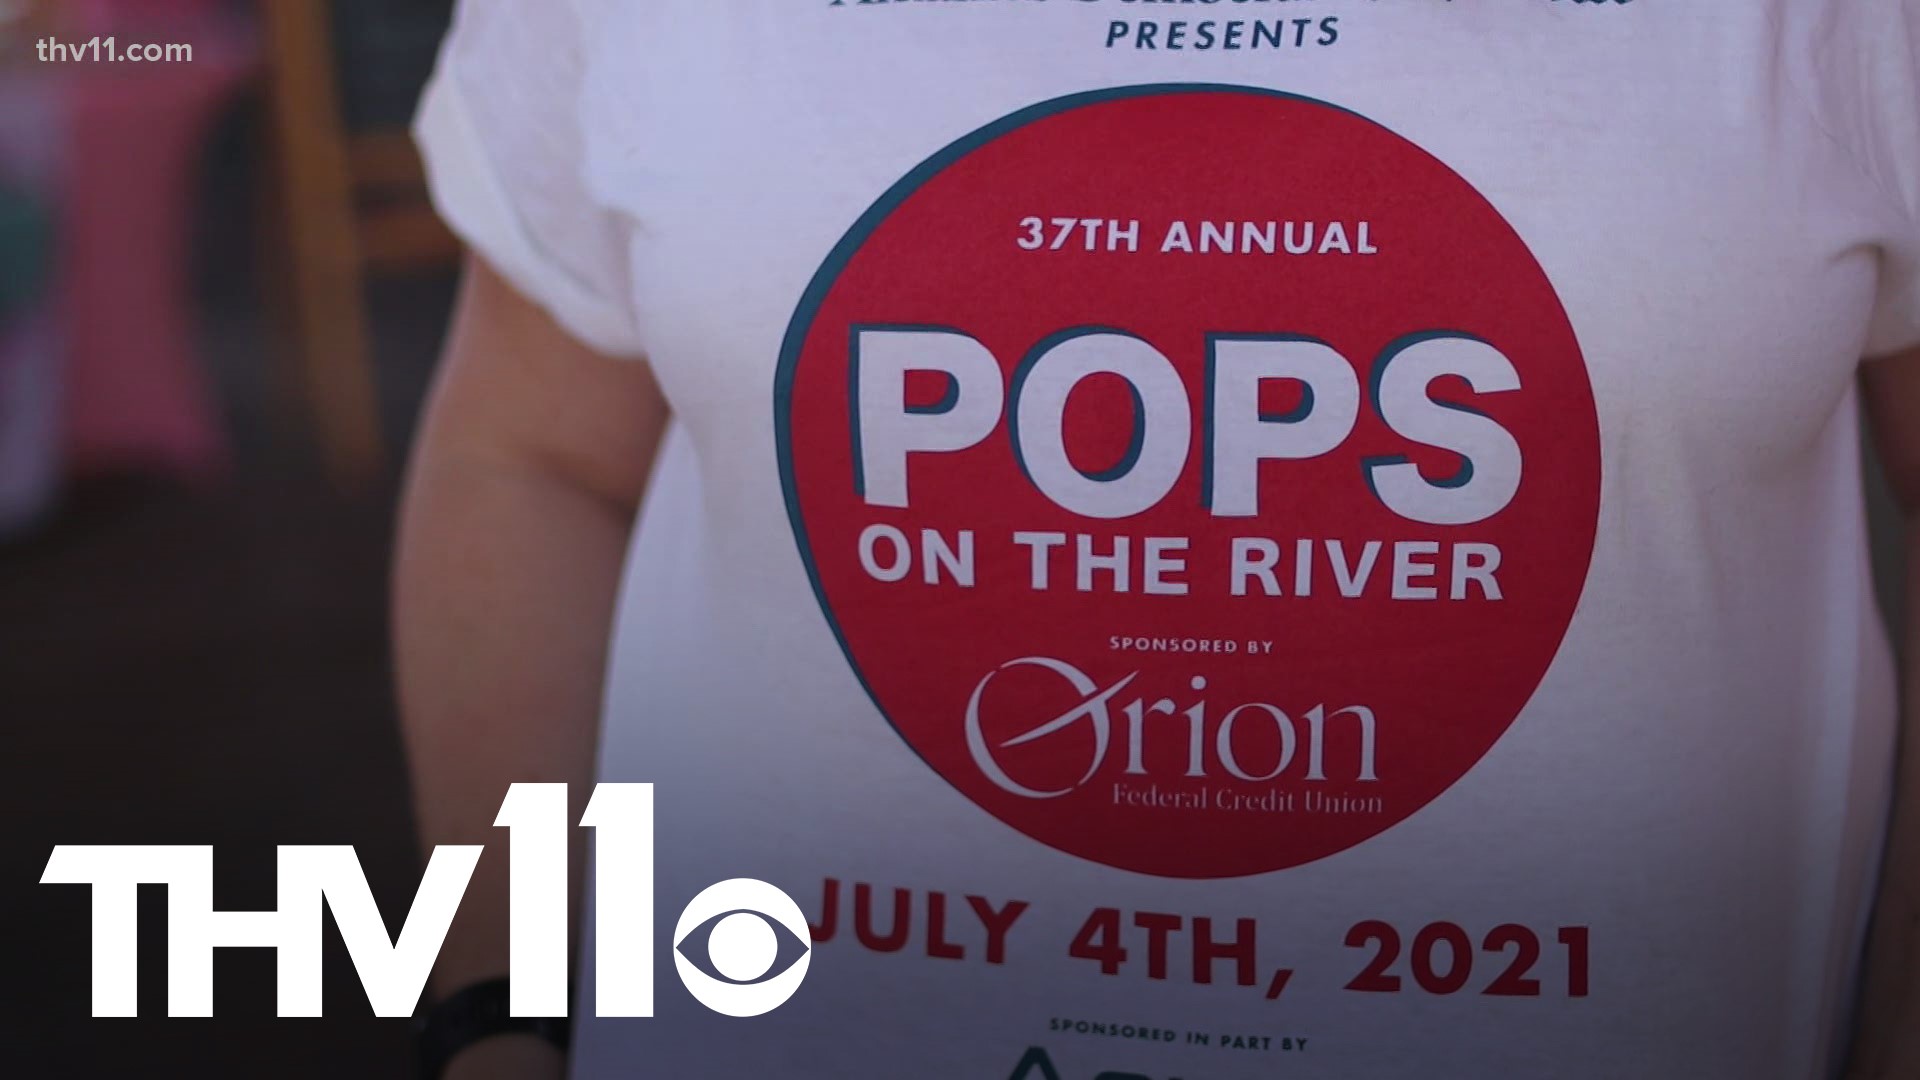 People have been looking forward to "Pops on the River" all year. Many said they were excited to be back around a big crowd again.